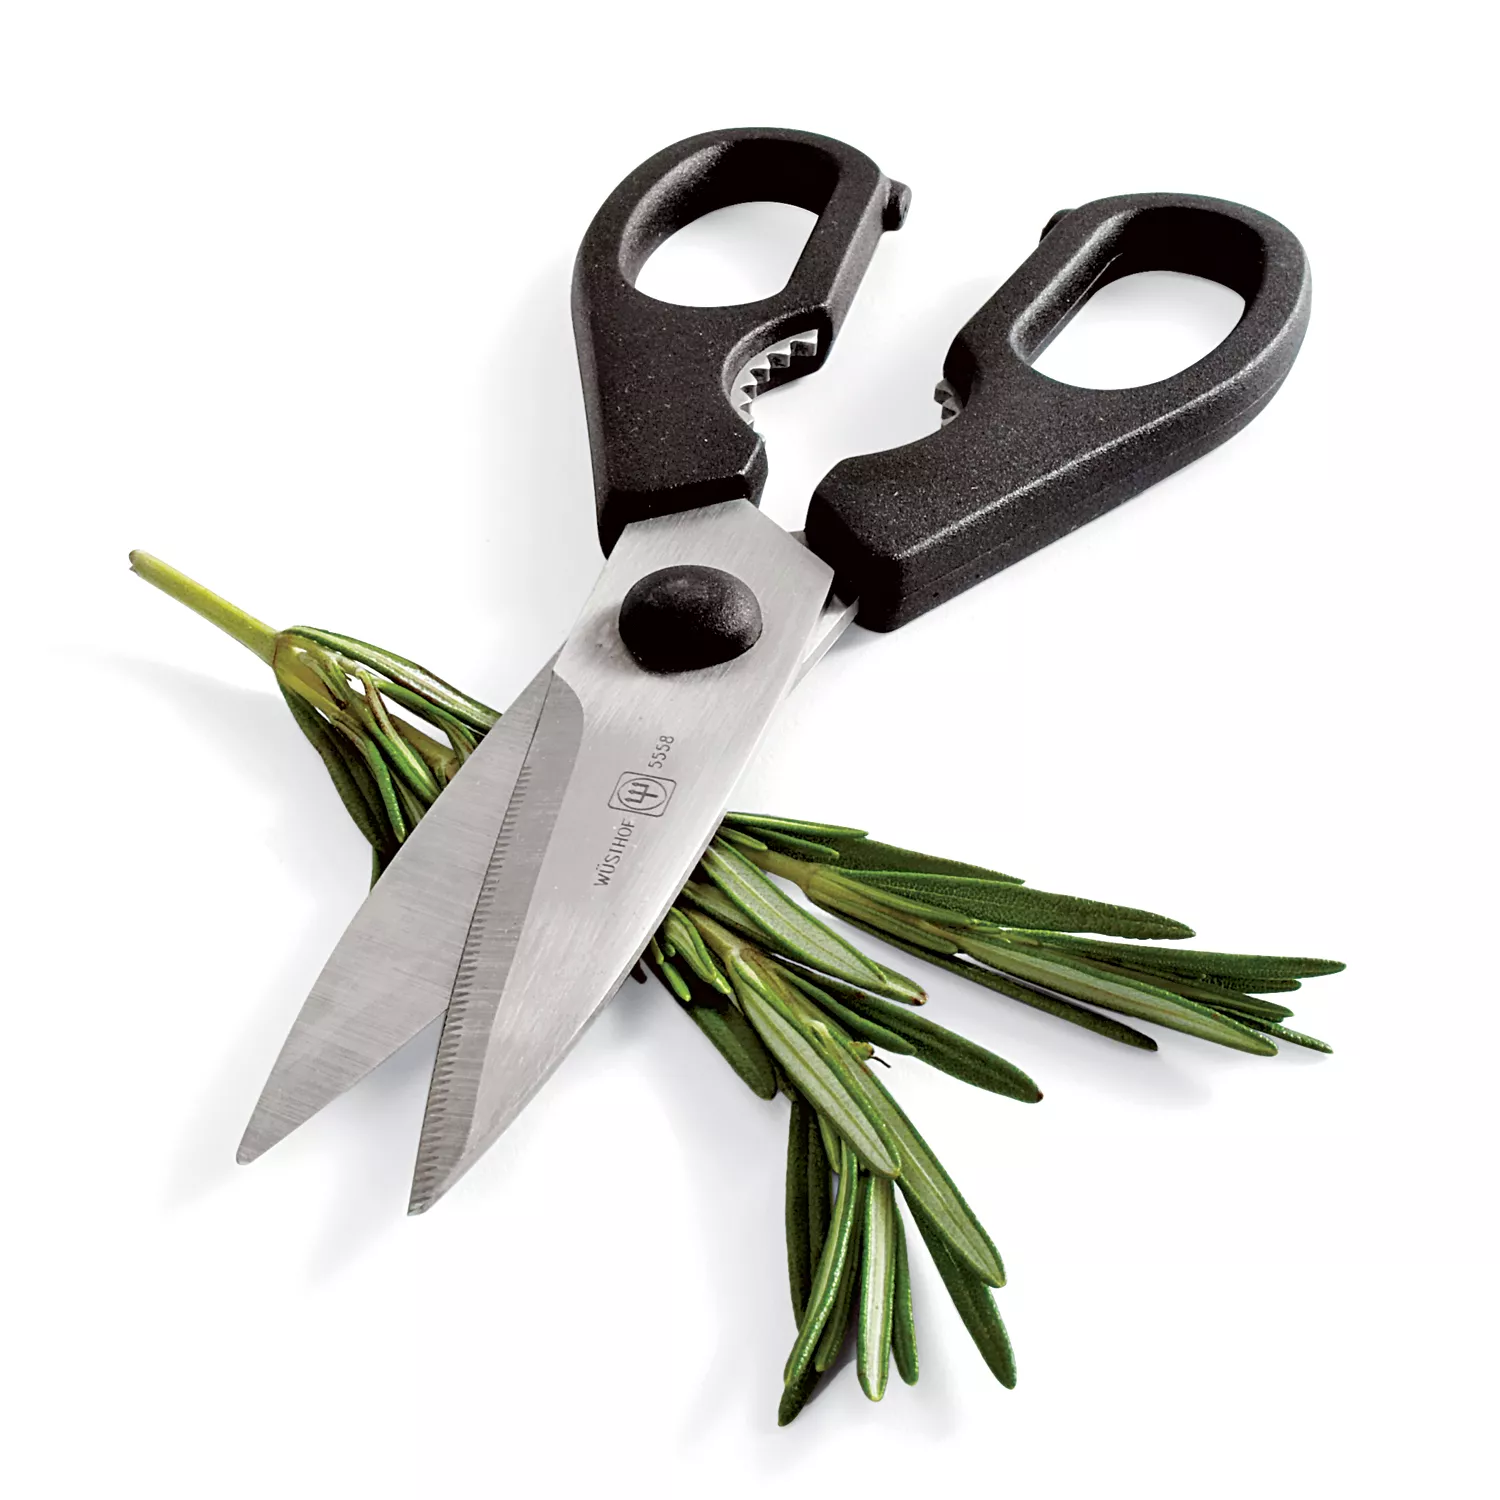 Wusthof Kitchen Shears - Come-Apart – Cutlery and More